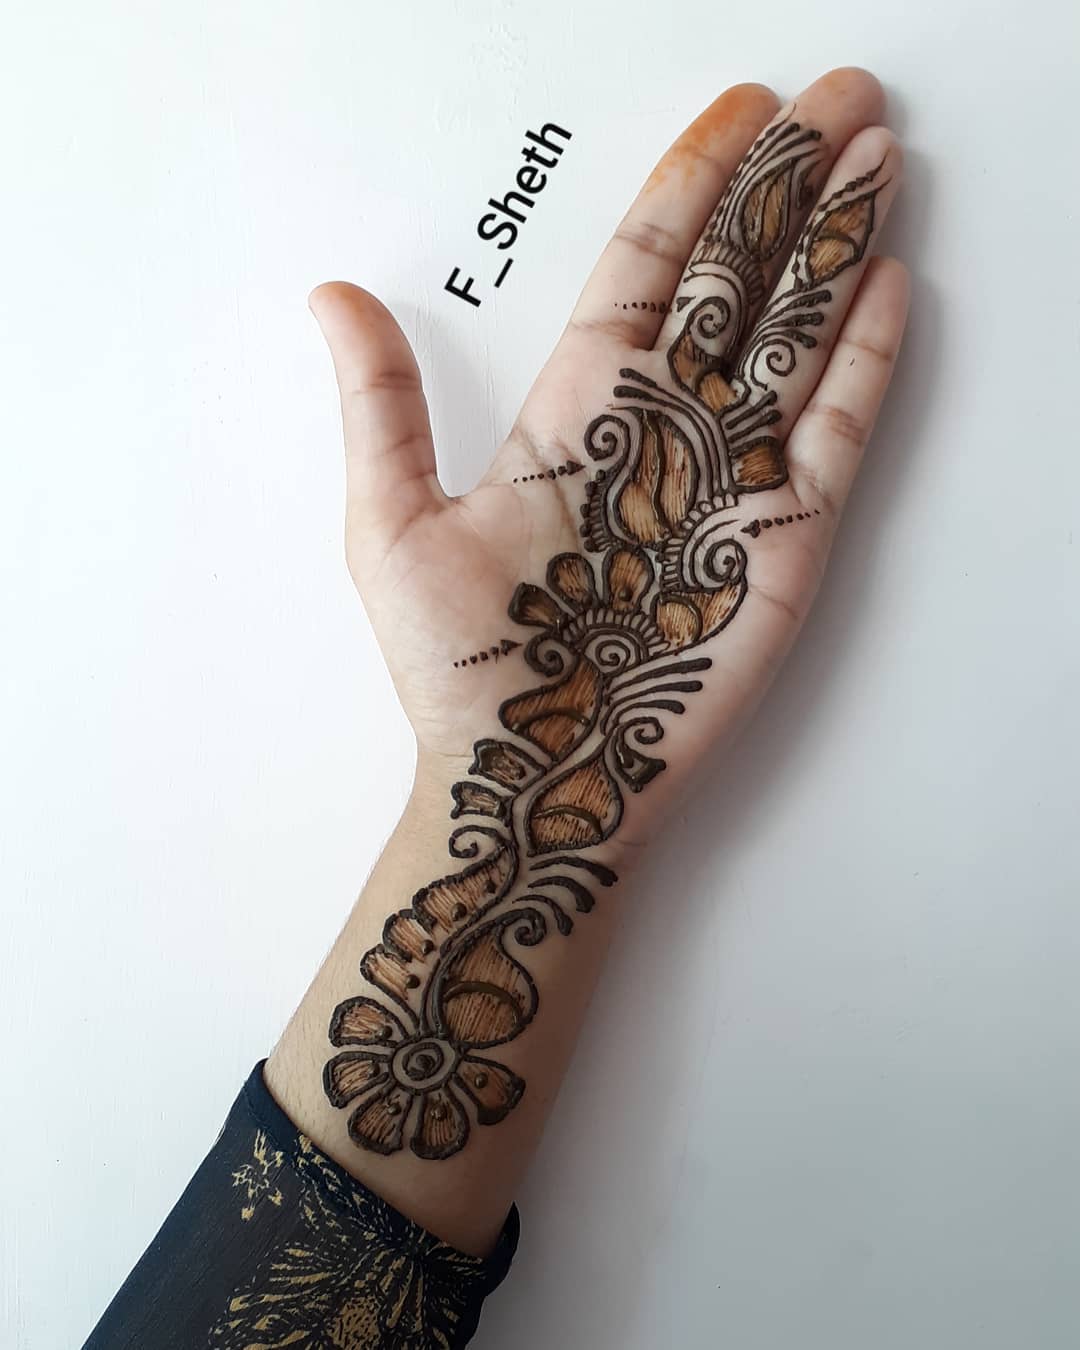 5 Shaded Mehndi Design Ideas to Add Visual Depth to Your Mehndi Look